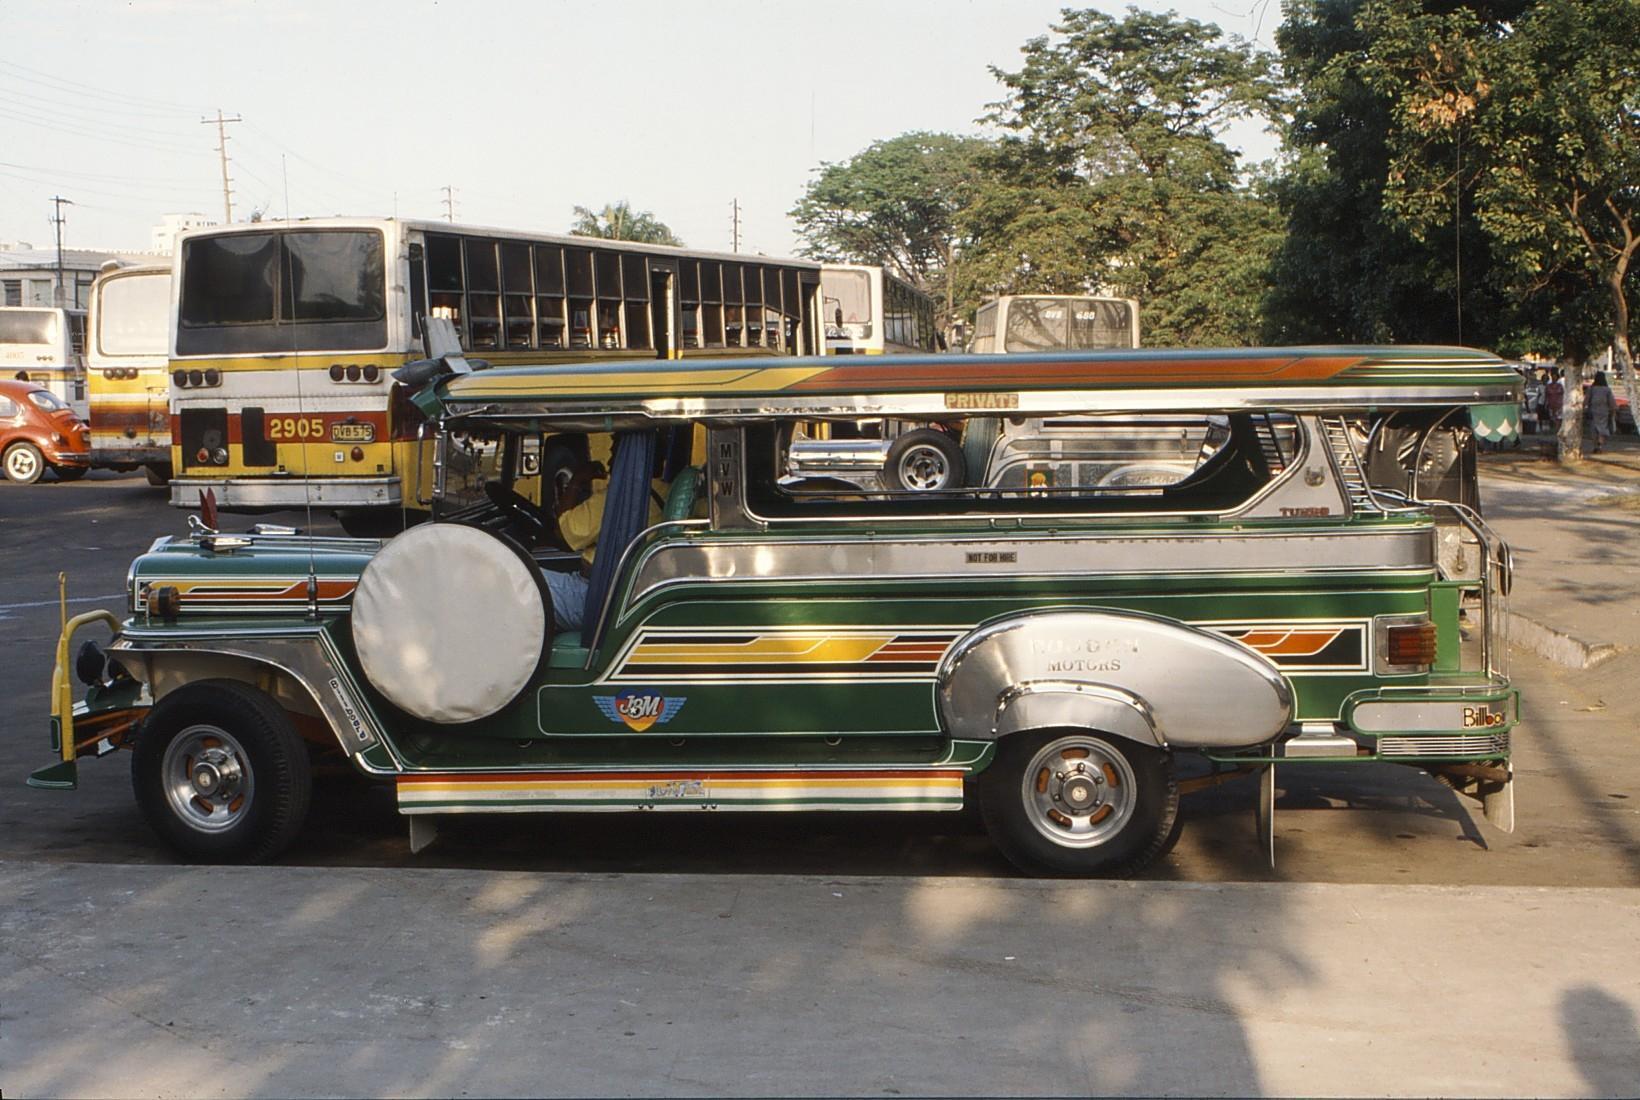 The jeep is one of the most utilized mode of public transportation in the Philippines. PHOTO: Wikimedia Commons